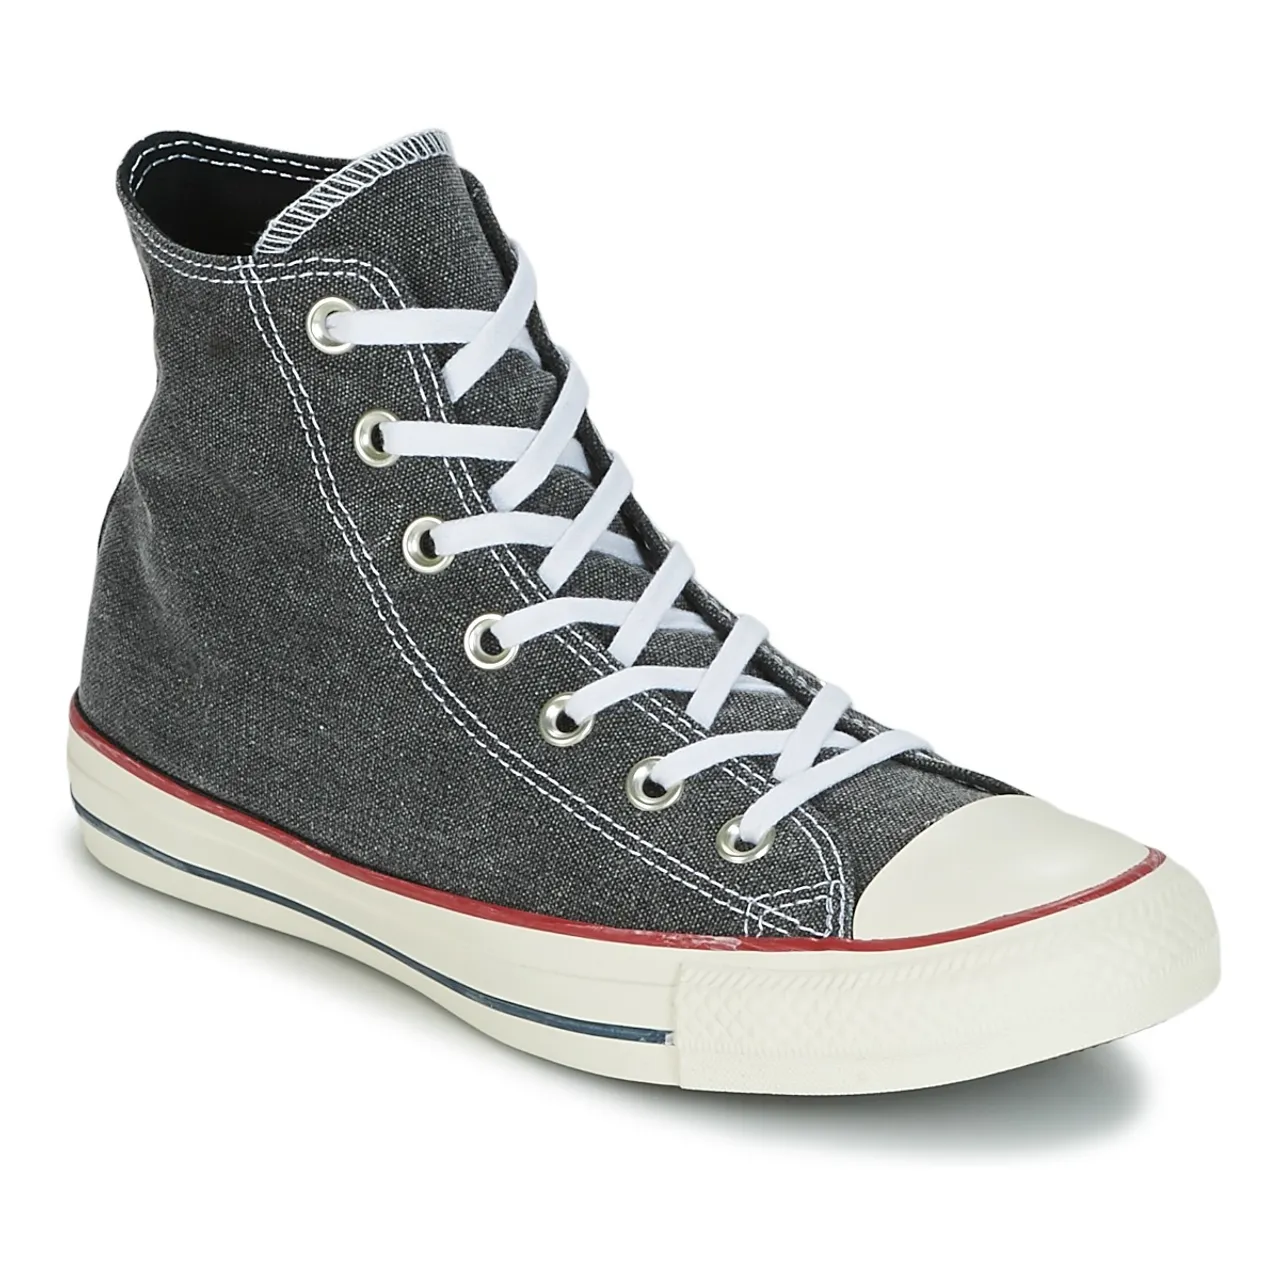 Converse  Chuck Taylor All Star Hi Stone Wash  women's Shoes (High-top Trainers) in Grey